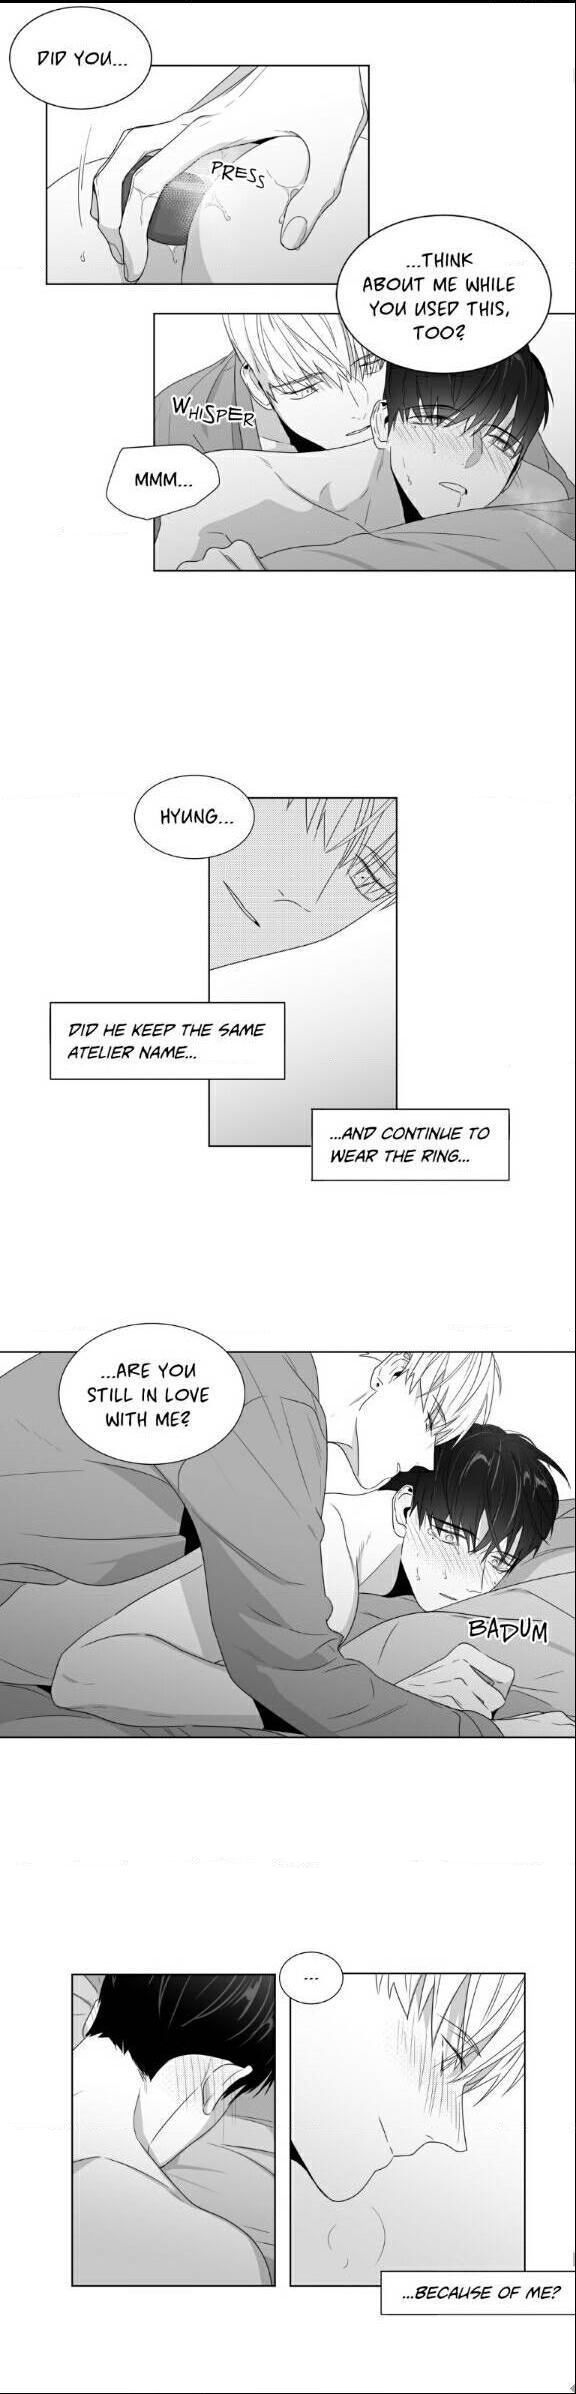 Lover Boy (Lezhin) Chapter 061 page 3